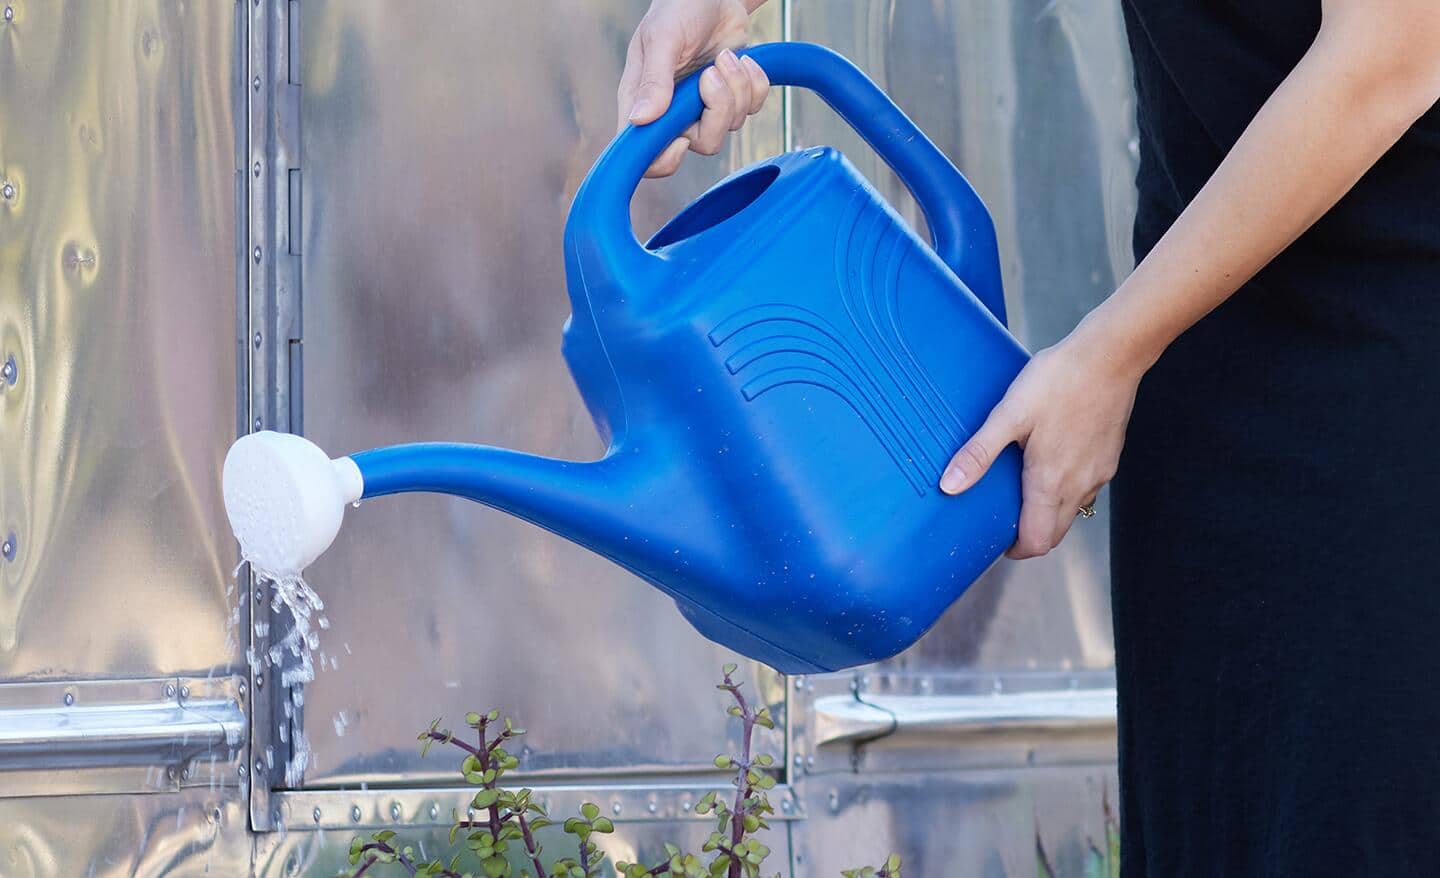 Gardener pours water from a blue plastic watering can onto garden plants